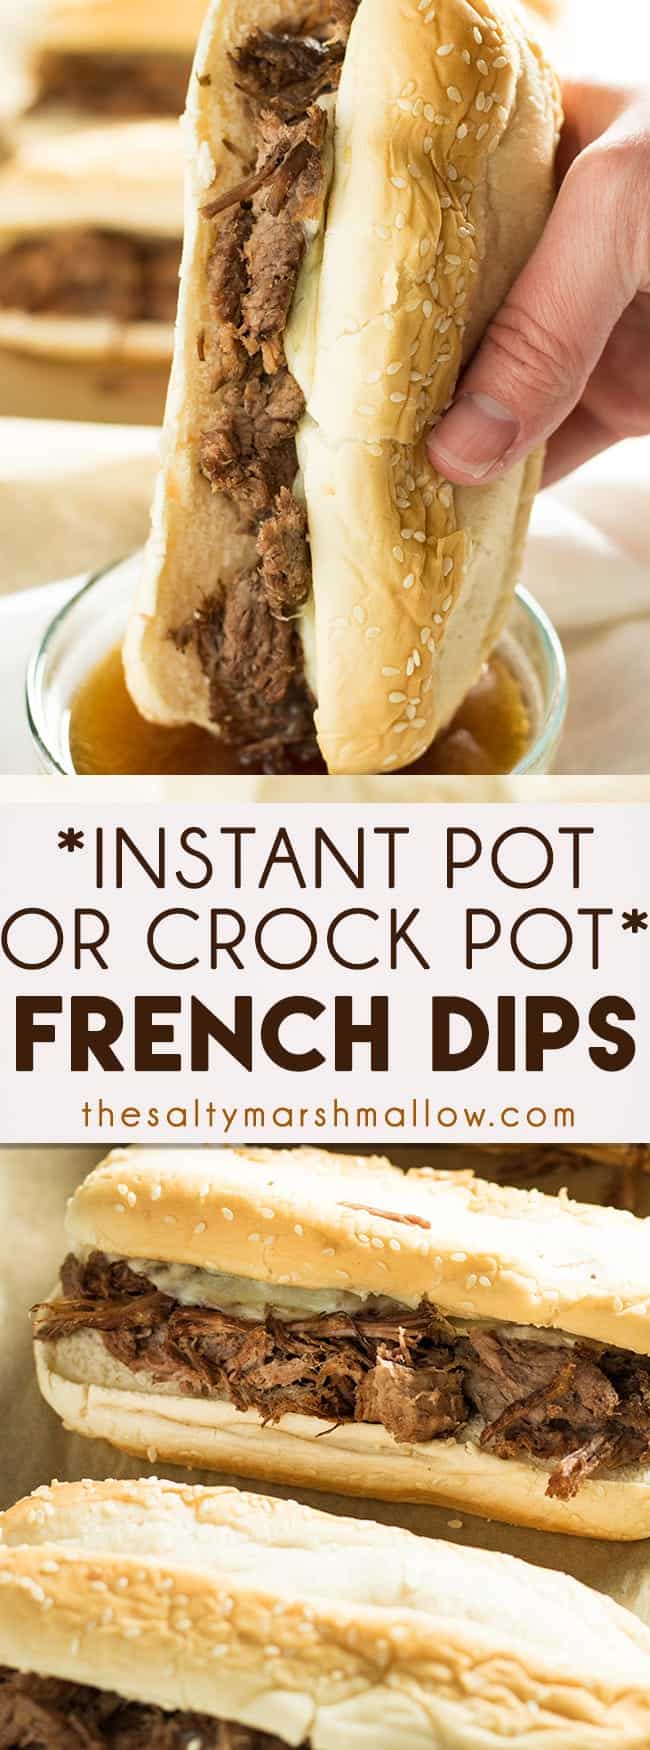 French Dip Sandwich {Instant Pot or Crockpot} - The Salty Marshmallow